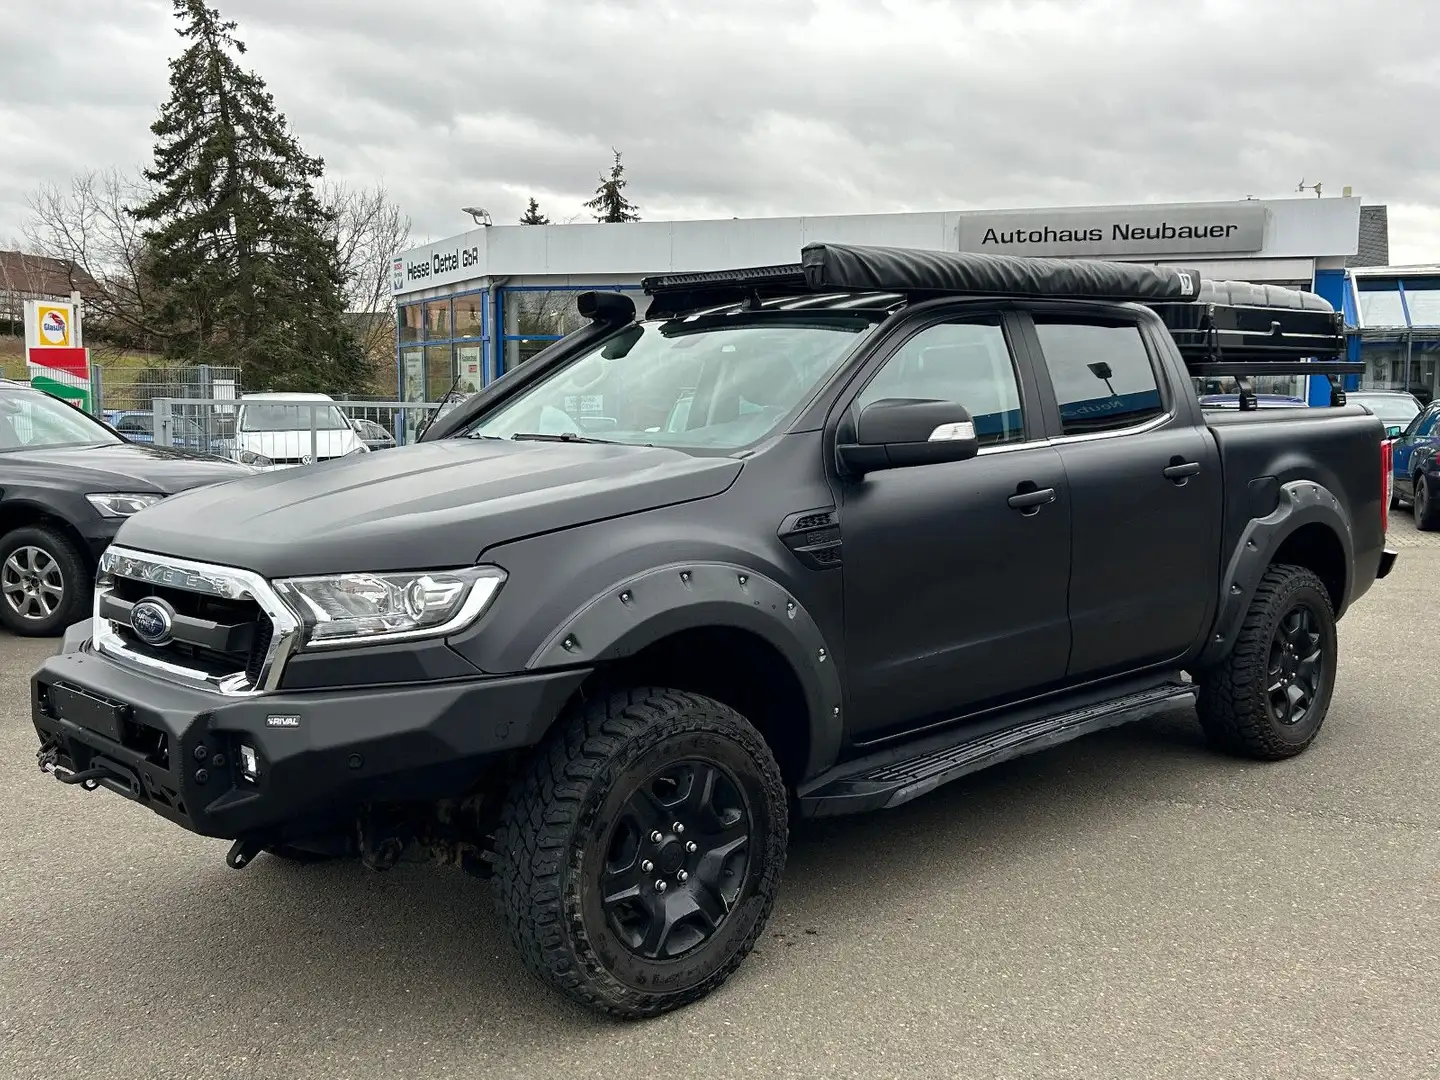 Ford Ranger 4x4 EXPEDITIONSMOBIL OFFROAD CAMPING Schwarz - 2